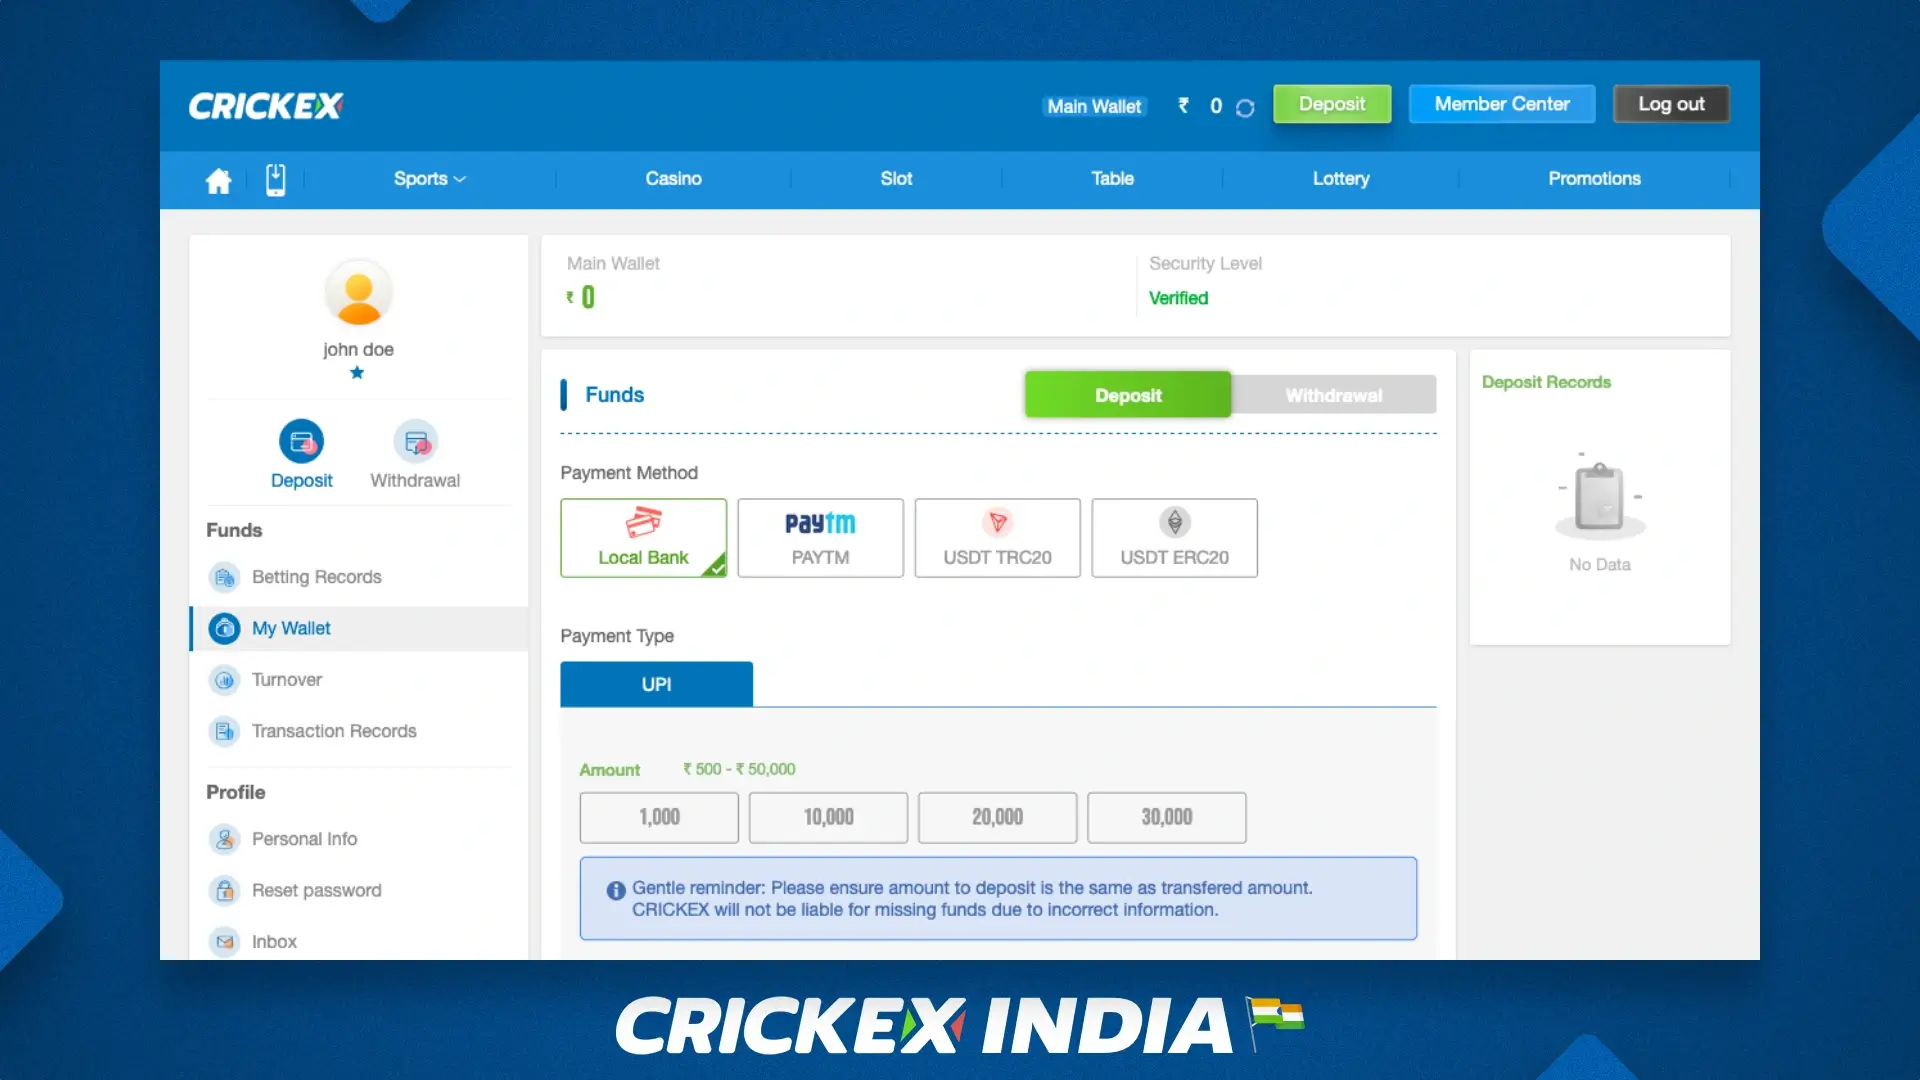 Payment methods available at Crickex, including paytm, usdt, local bank